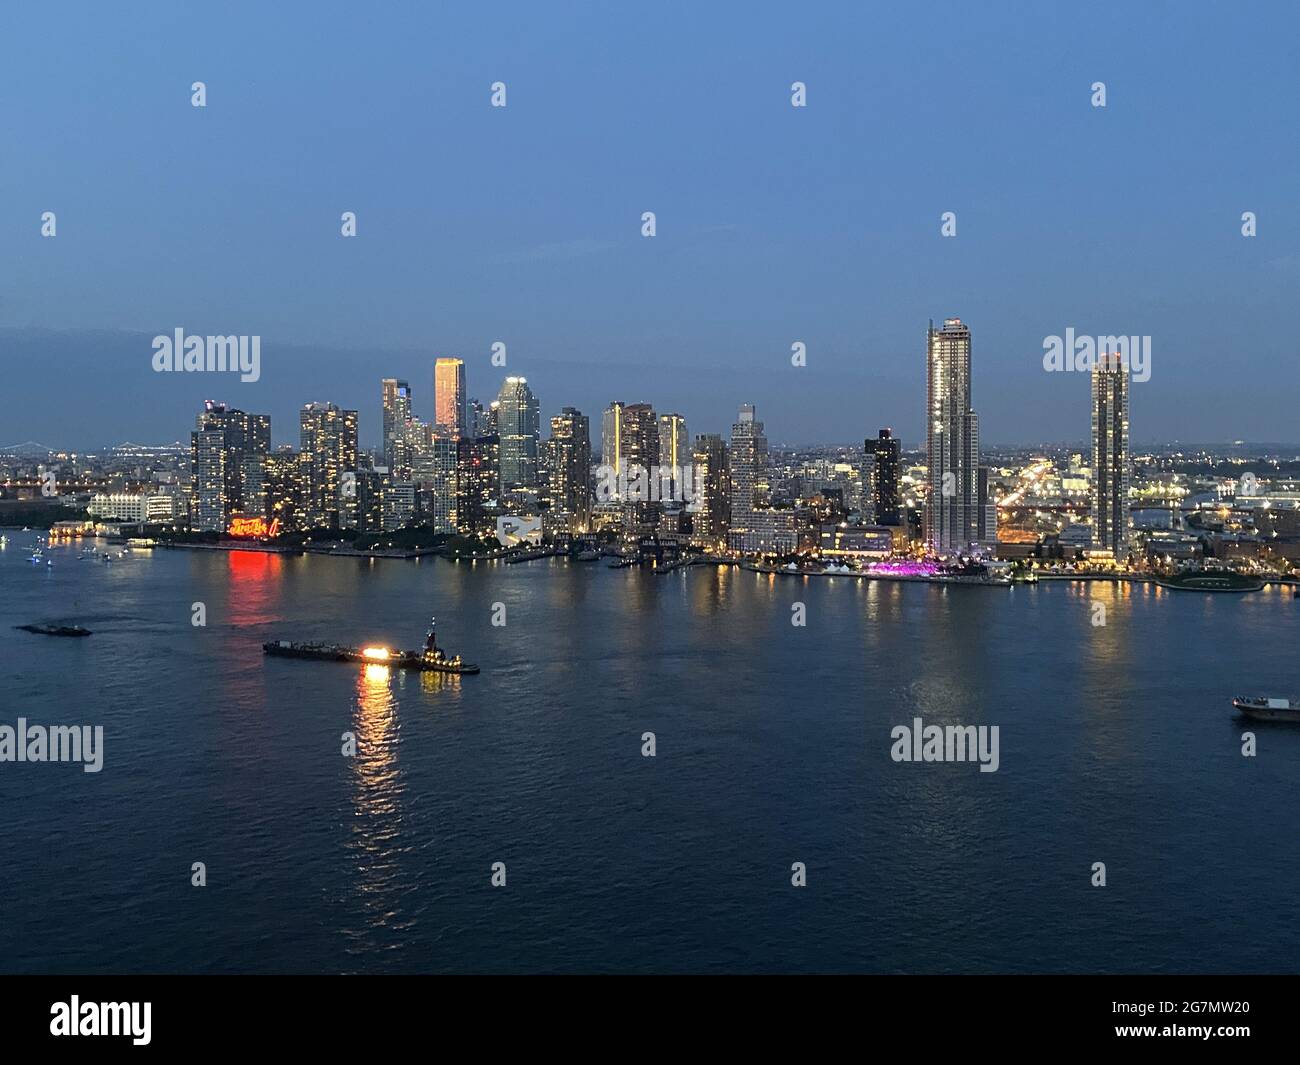 Looking across the East River from 34th Street in Manhattan at the Queens shoreline on. Julhy 4th 2021. The barges seen in the river are where the Macy's annul fireworks display will be launched after dark. Stock Photo